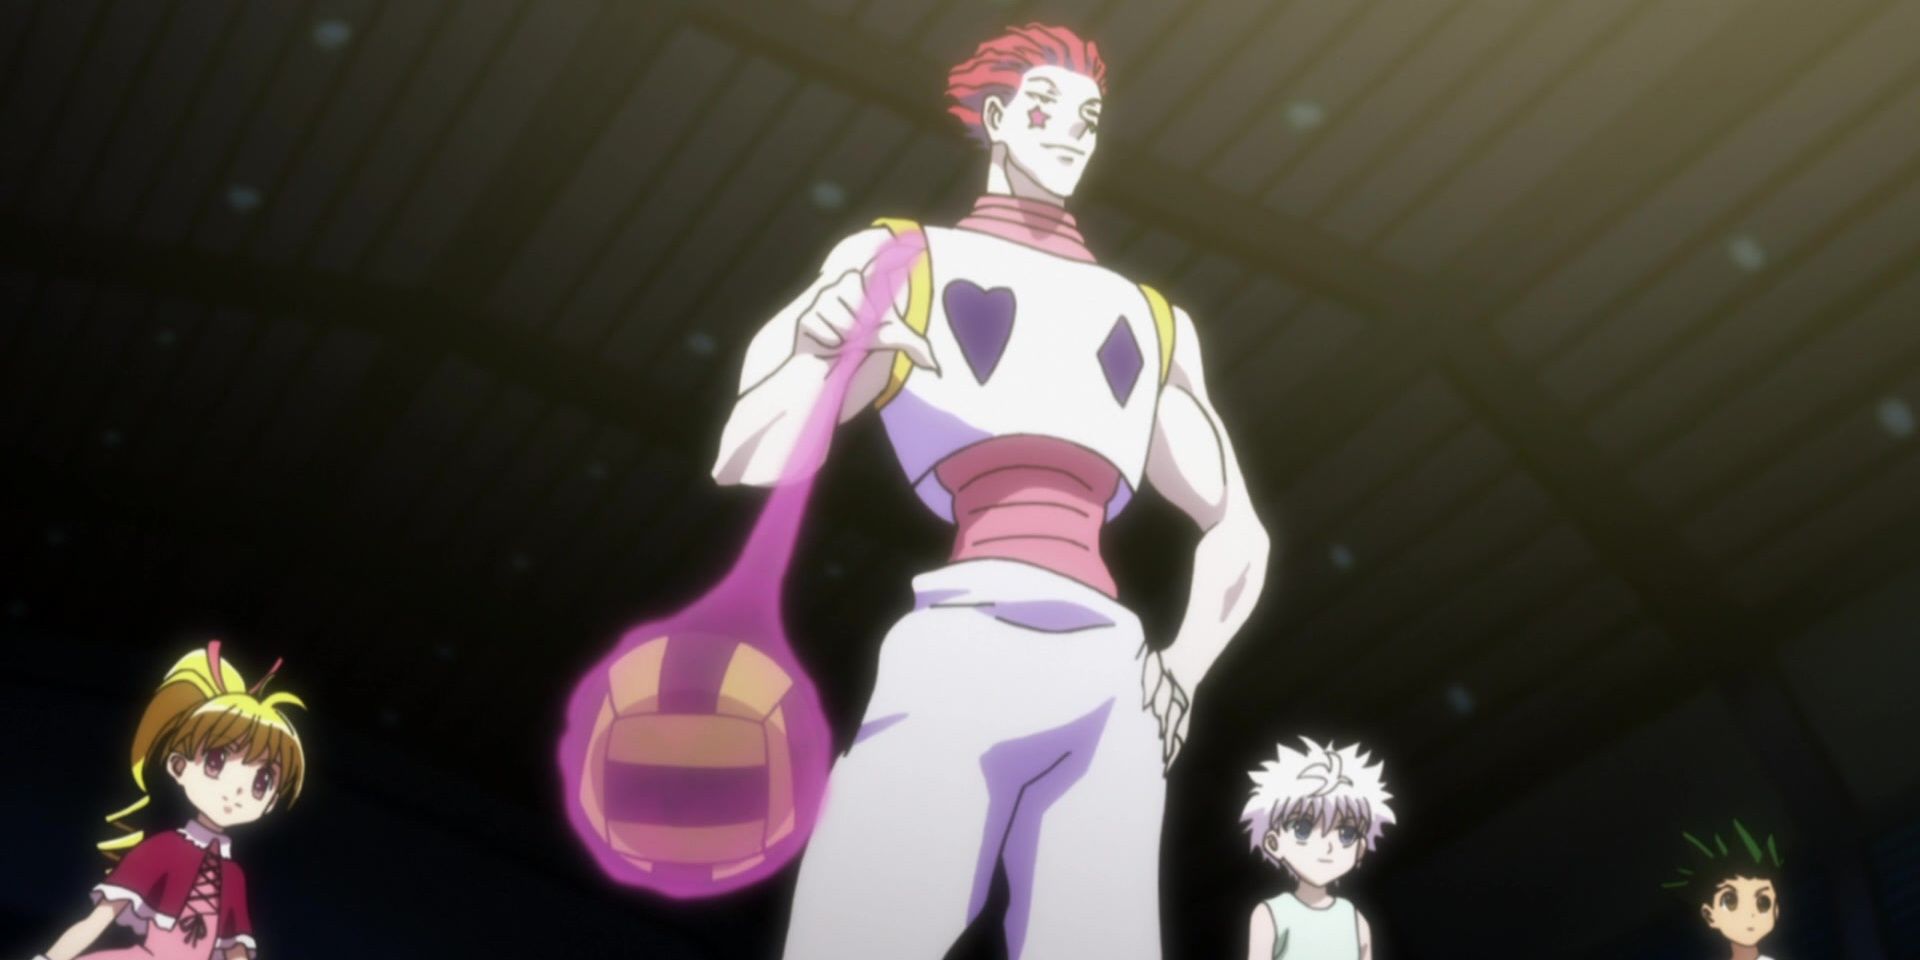 Killua, Gon, Hisoka, and Biscuit at the Greed Island Dodgeball Match in Hunter x Hunter.